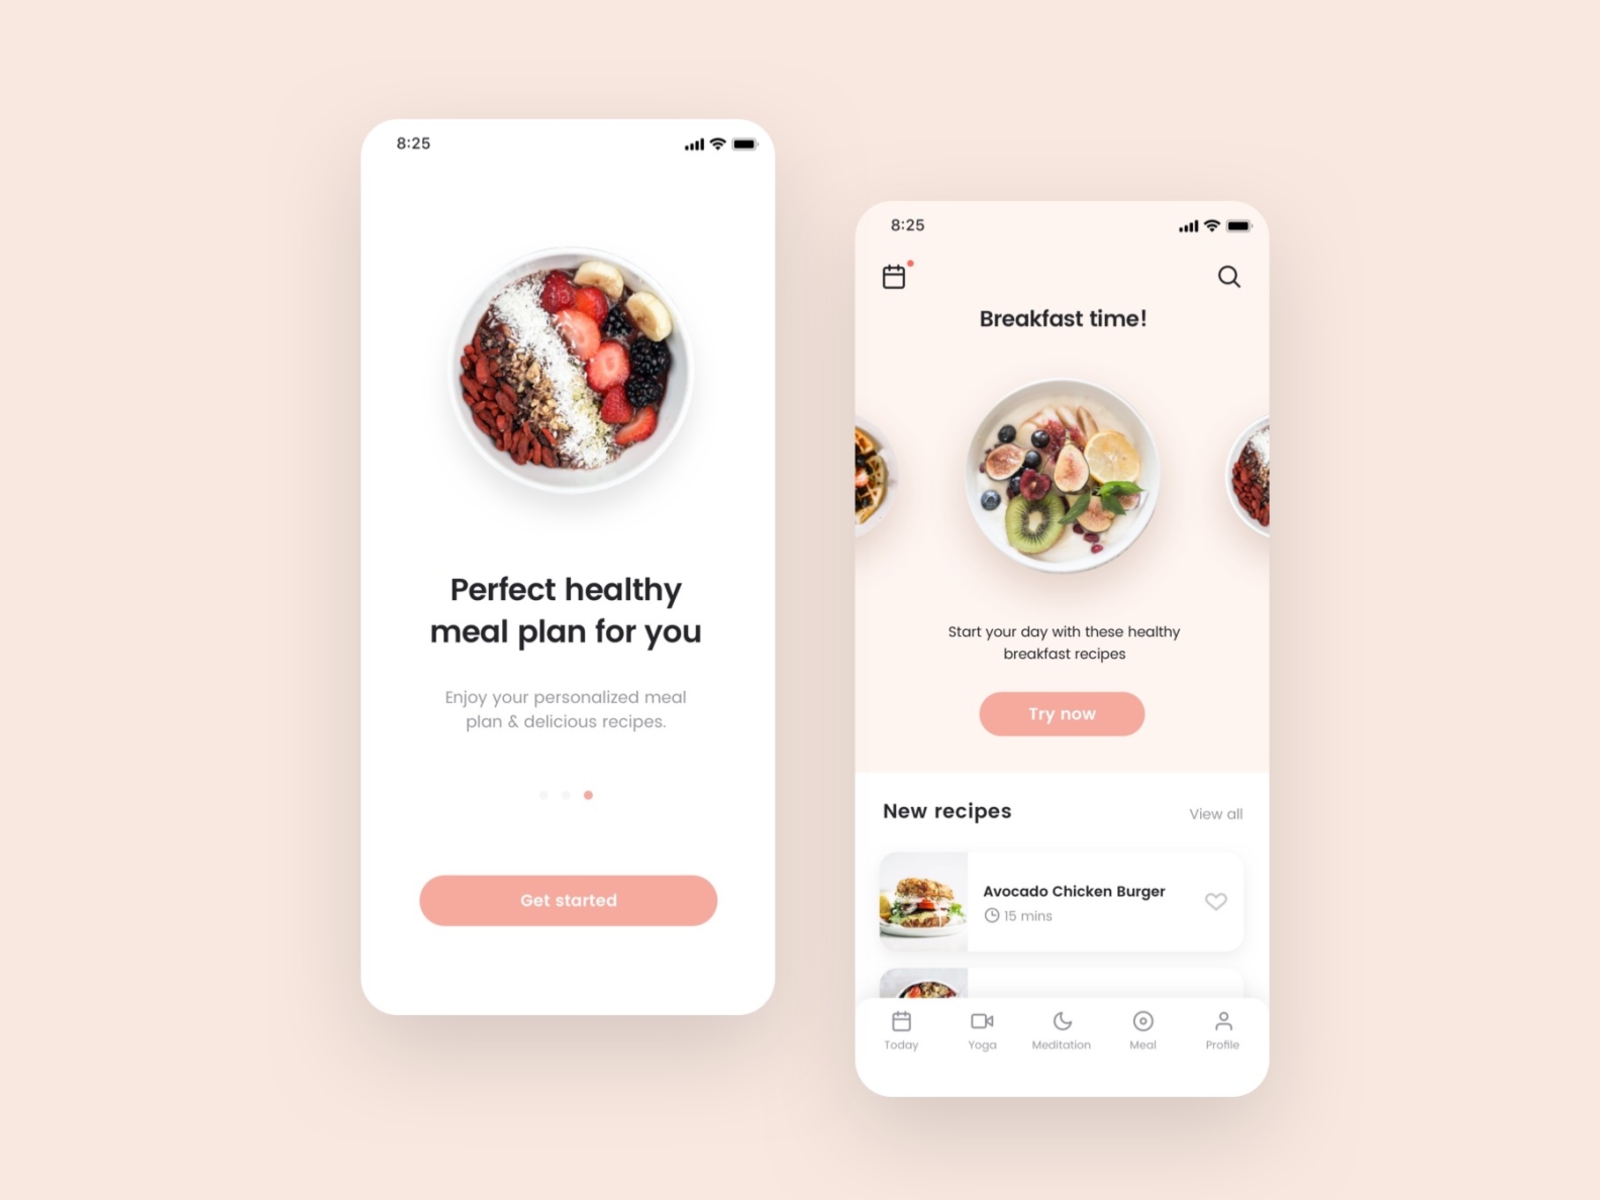 Healthy meal plan UI design by Interface Market on Dribbble